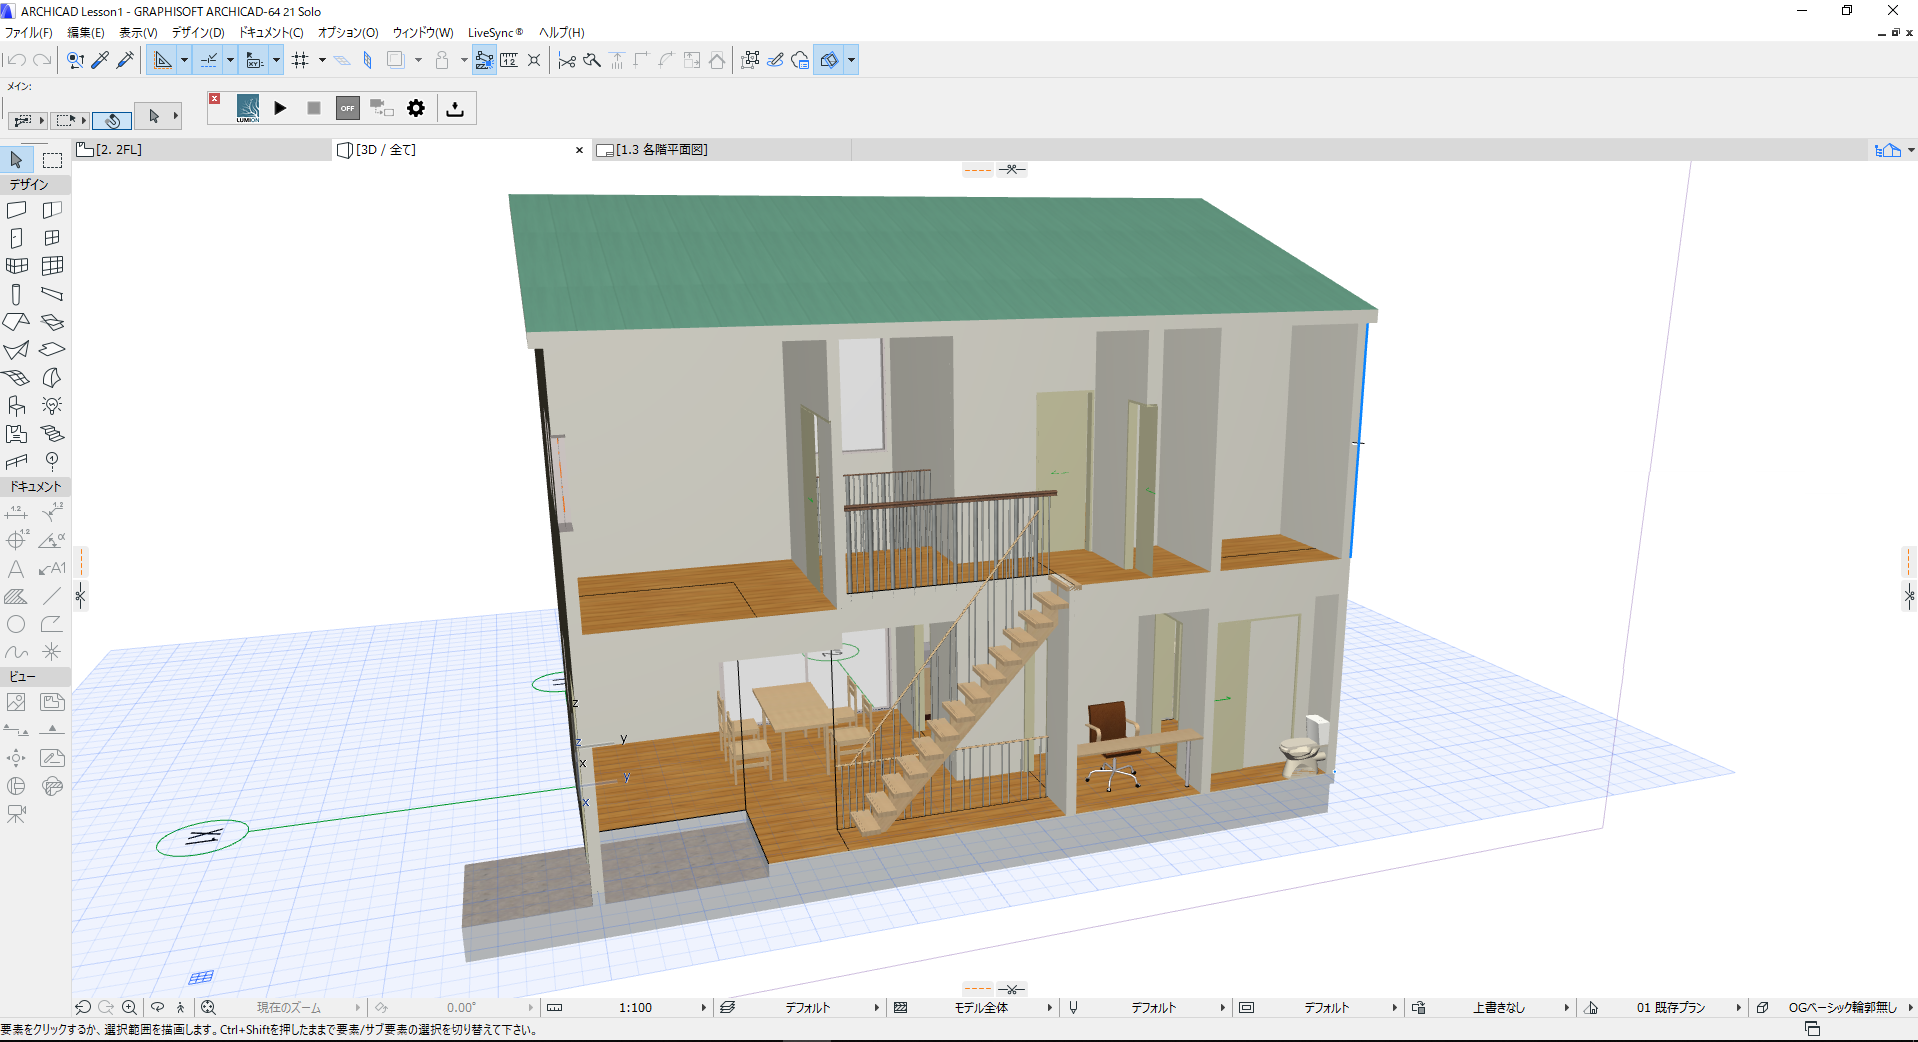 how to crack archicad 19